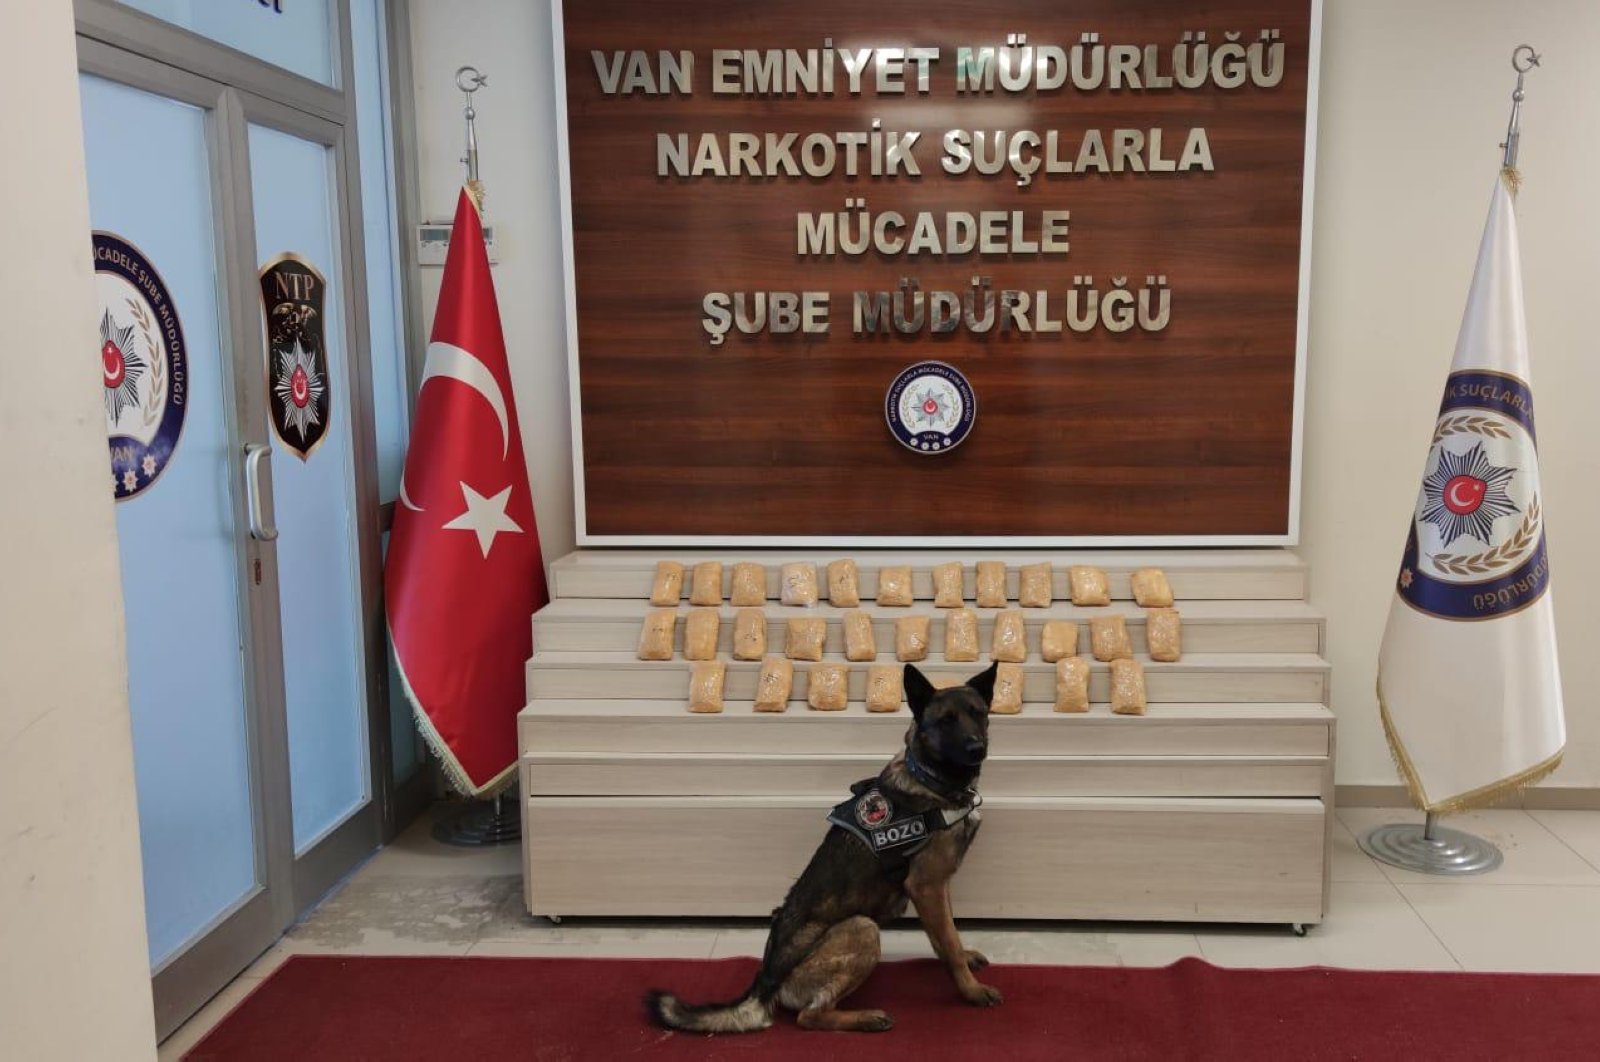 A sniffer dog poses in front of captured drugs, Friday, March 20, 2020, in Van. (AA Photo) 